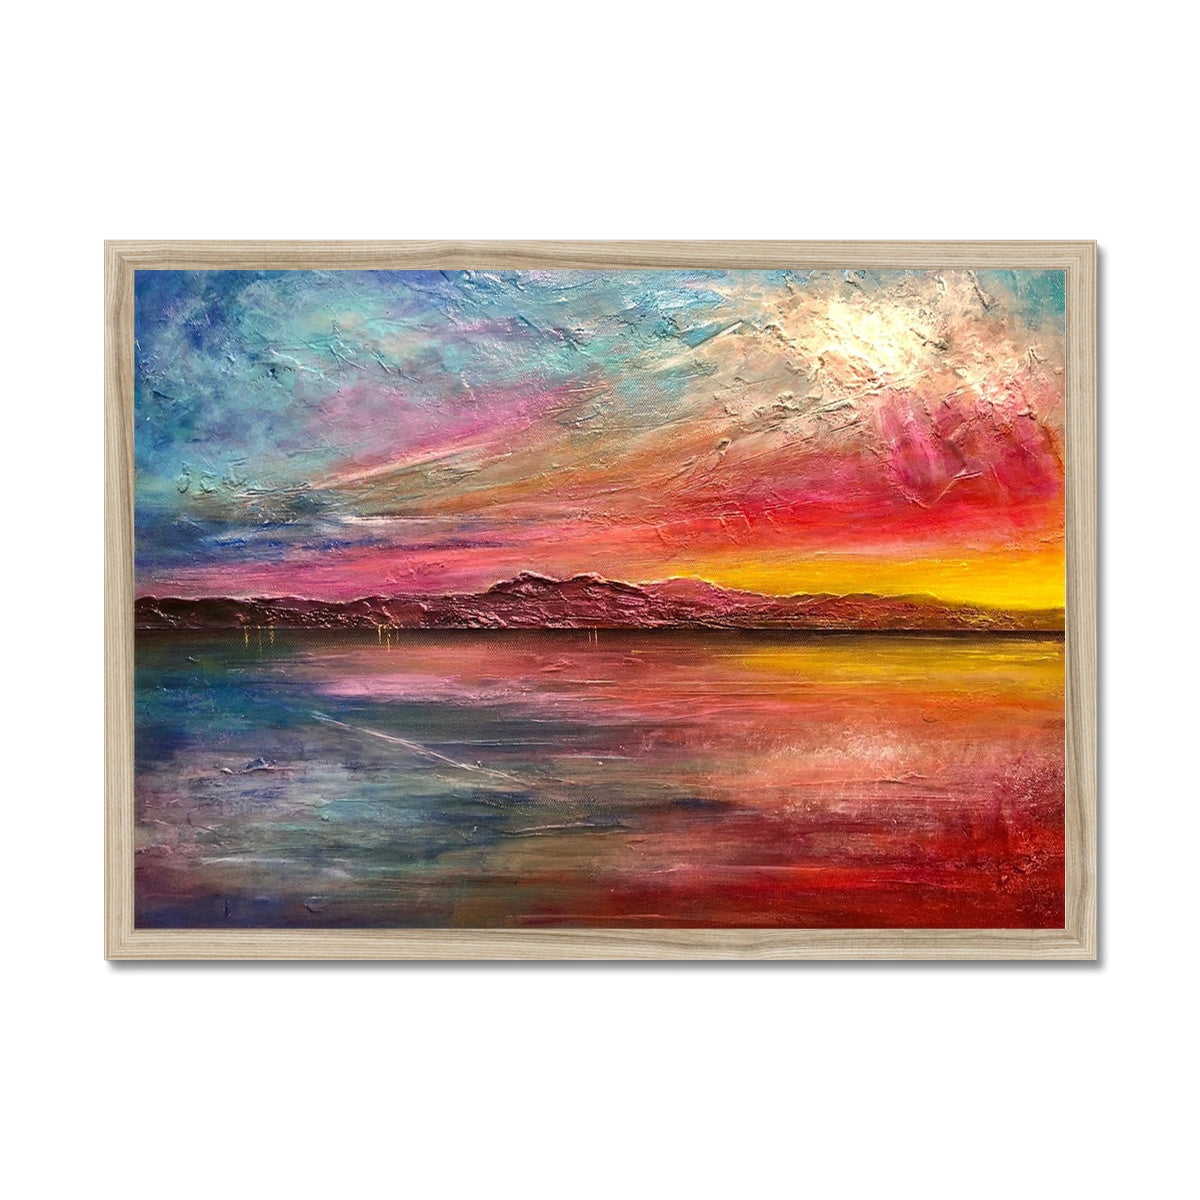 Arran Sunset ii Painting | Framed Prints From Scotland-Framed Prints-Arran Art Gallery-A2 Landscape-Natural Frame-Paintings, Prints, Homeware, Art Gifts From Scotland By Scottish Artist Kevin Hunter